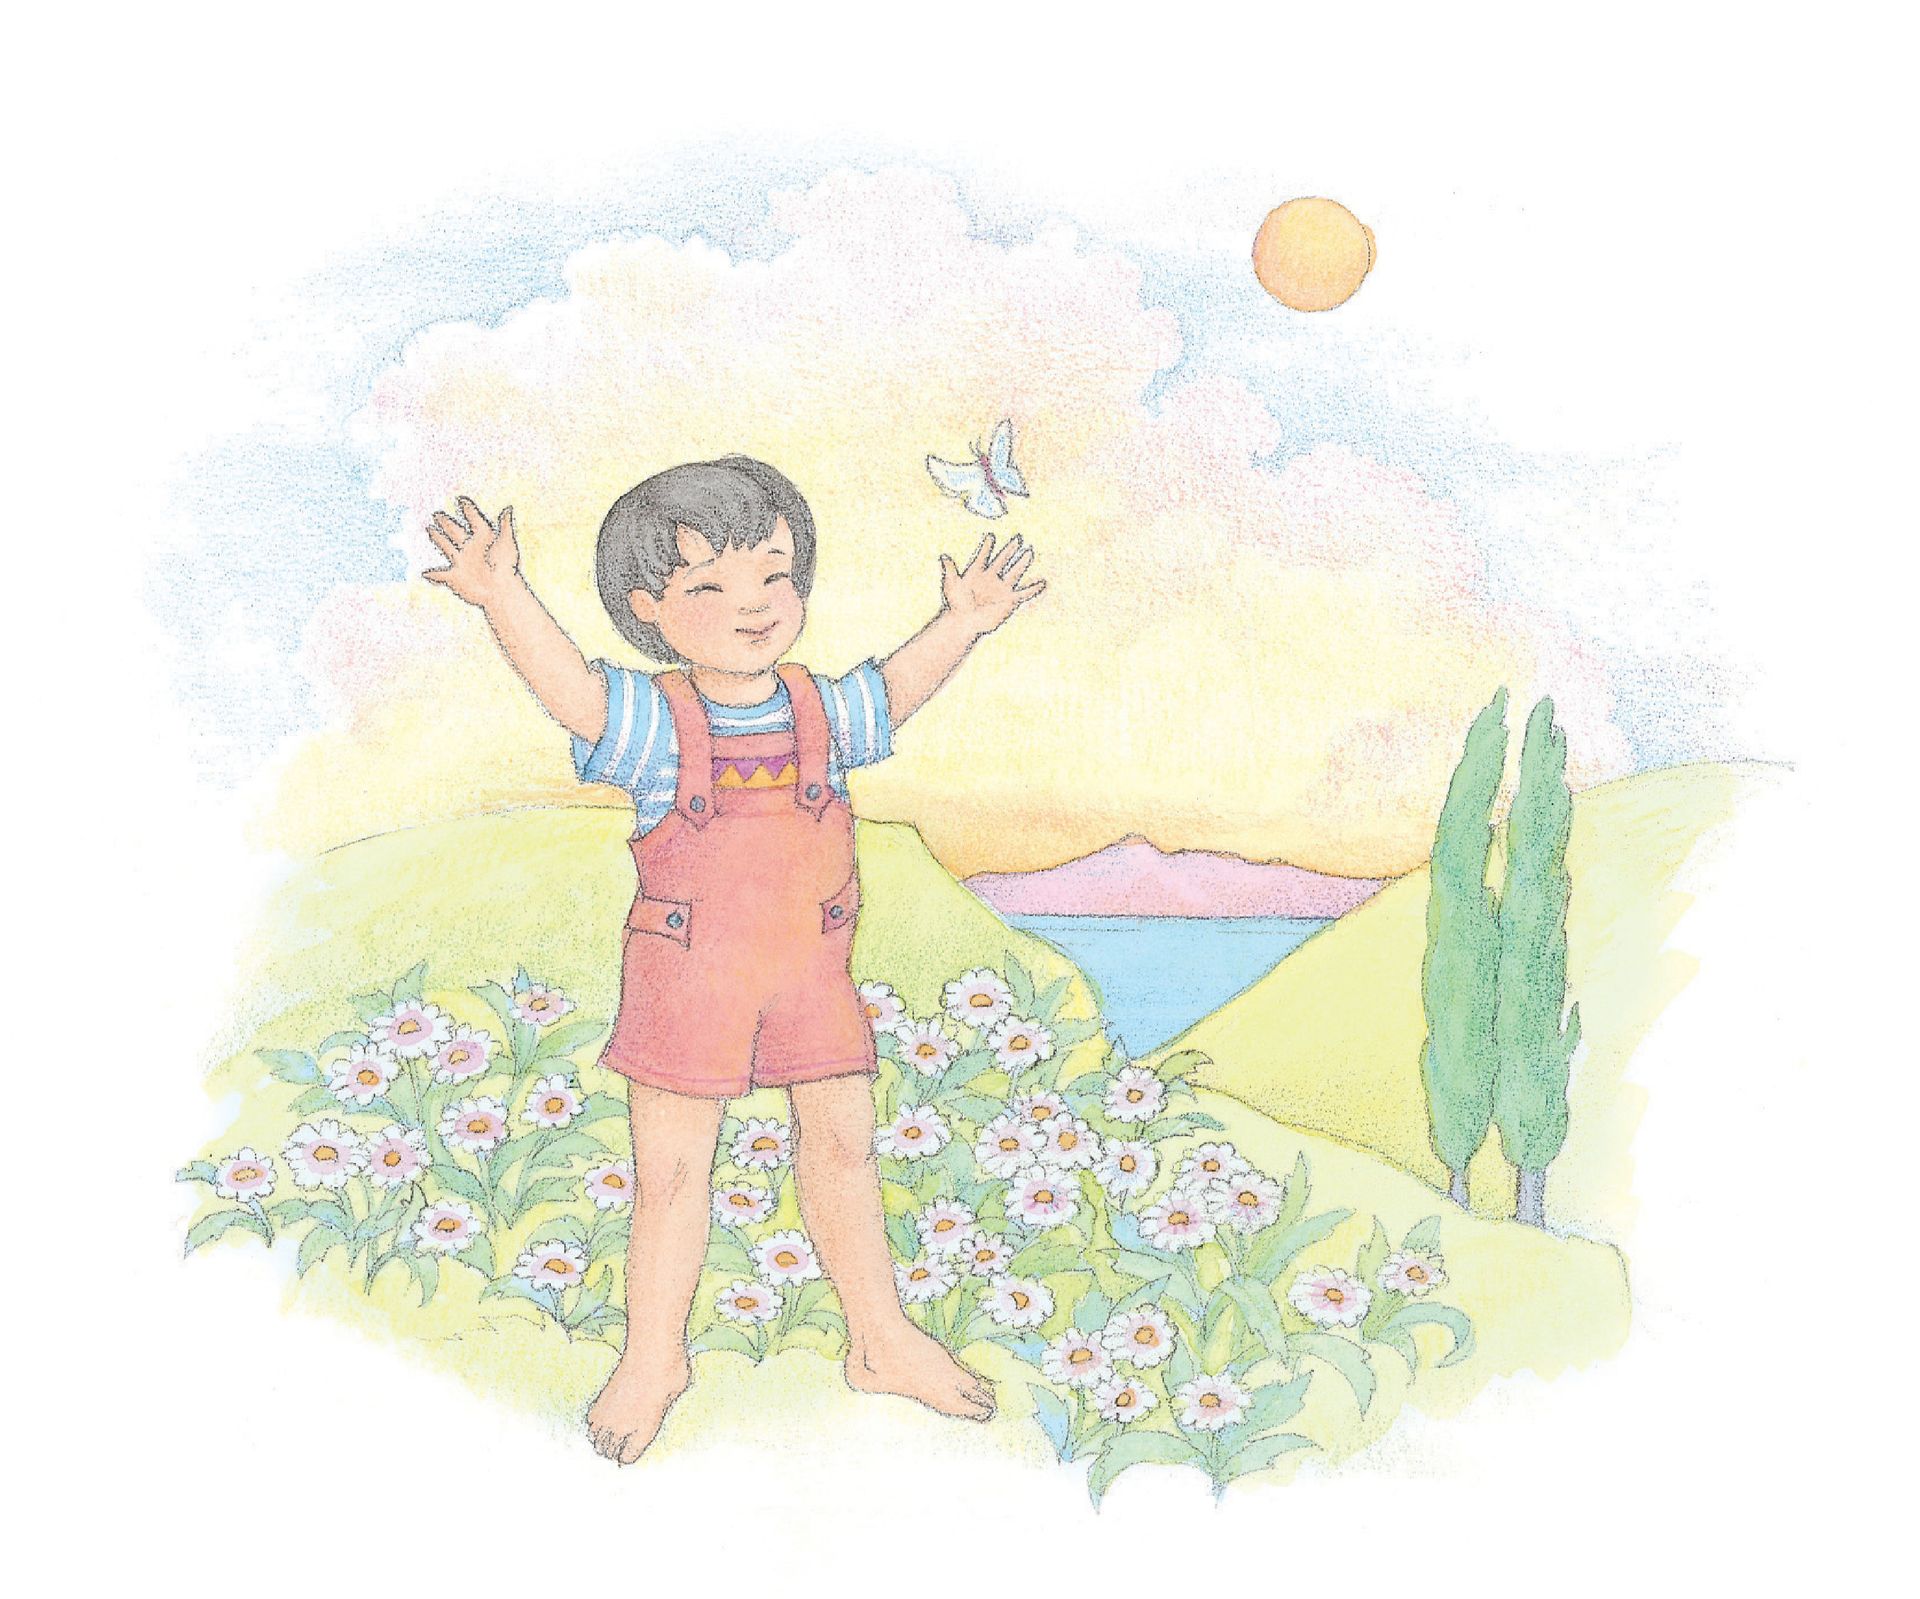 A boy in a meadow reaching toward a butterfly. From the Children’s Songbook, page 74, “I Feel My Savior’s Love”; watercolor illustration by Phyllis Luch.